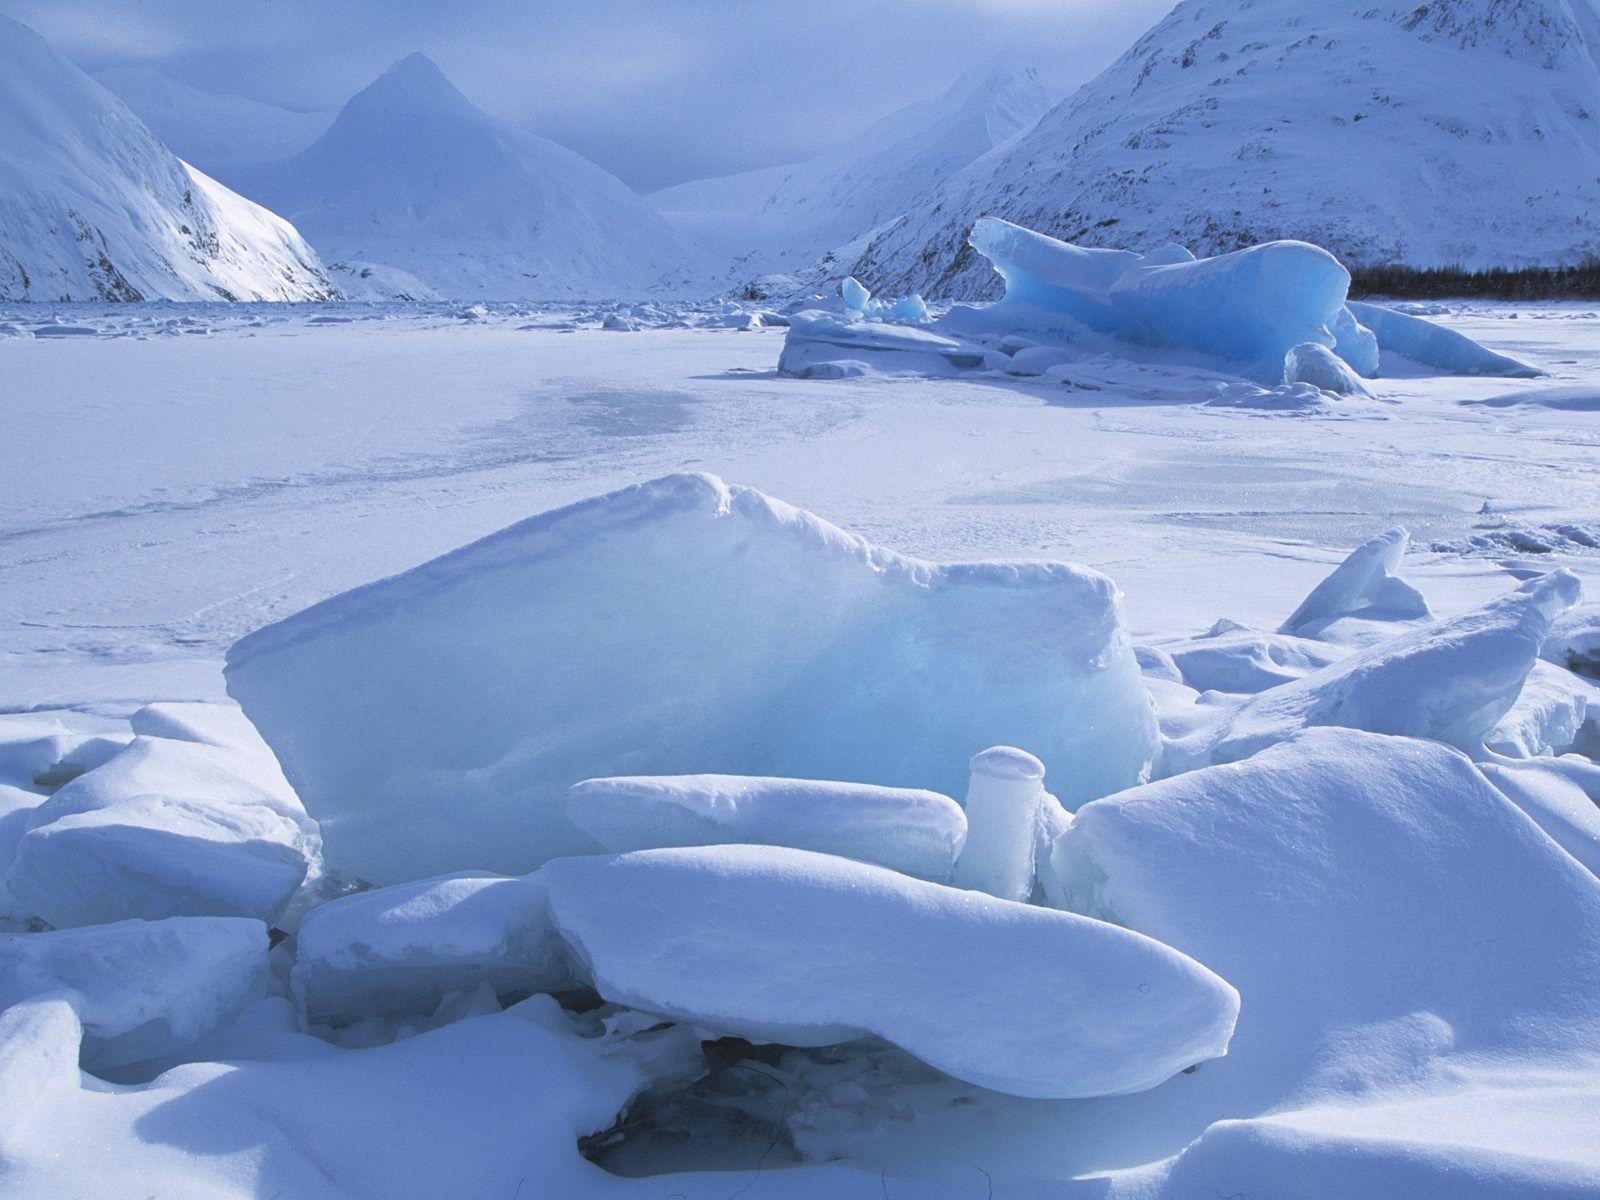 Nature: Icebergs Within A Frozen Lake, Alaska, picture nr. 40002